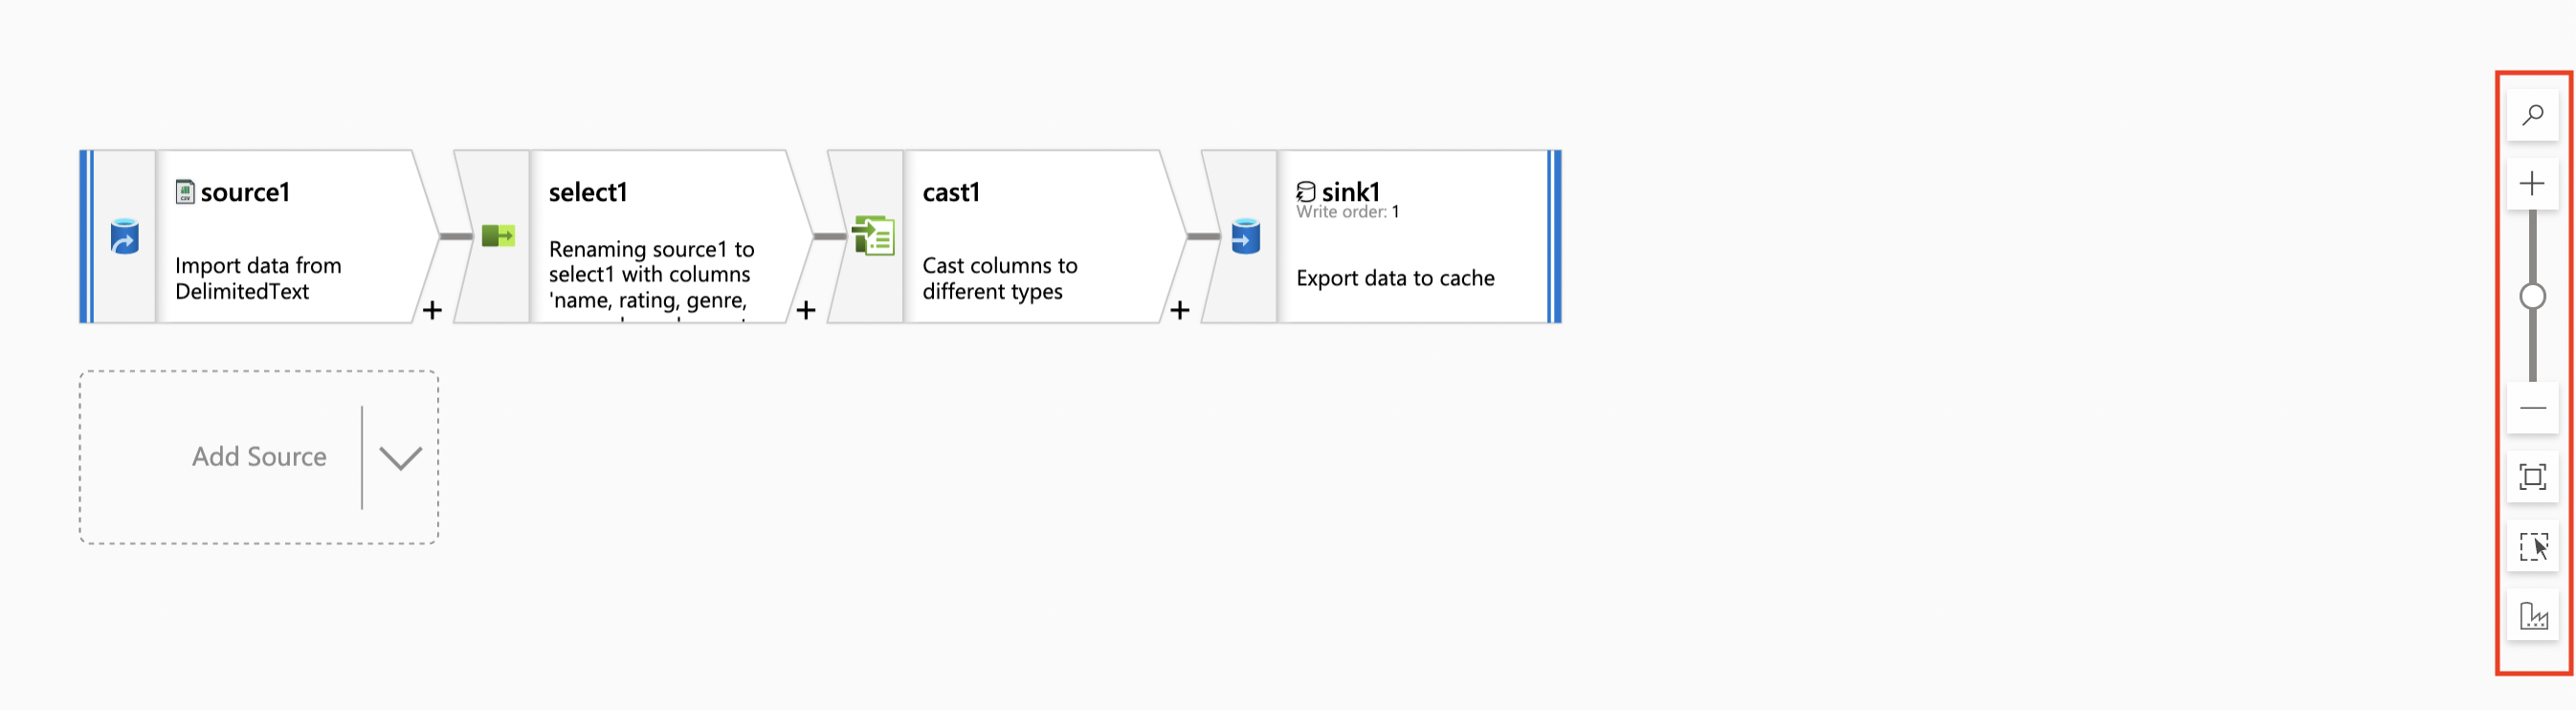 Screenshot of the data flow editing canvas.